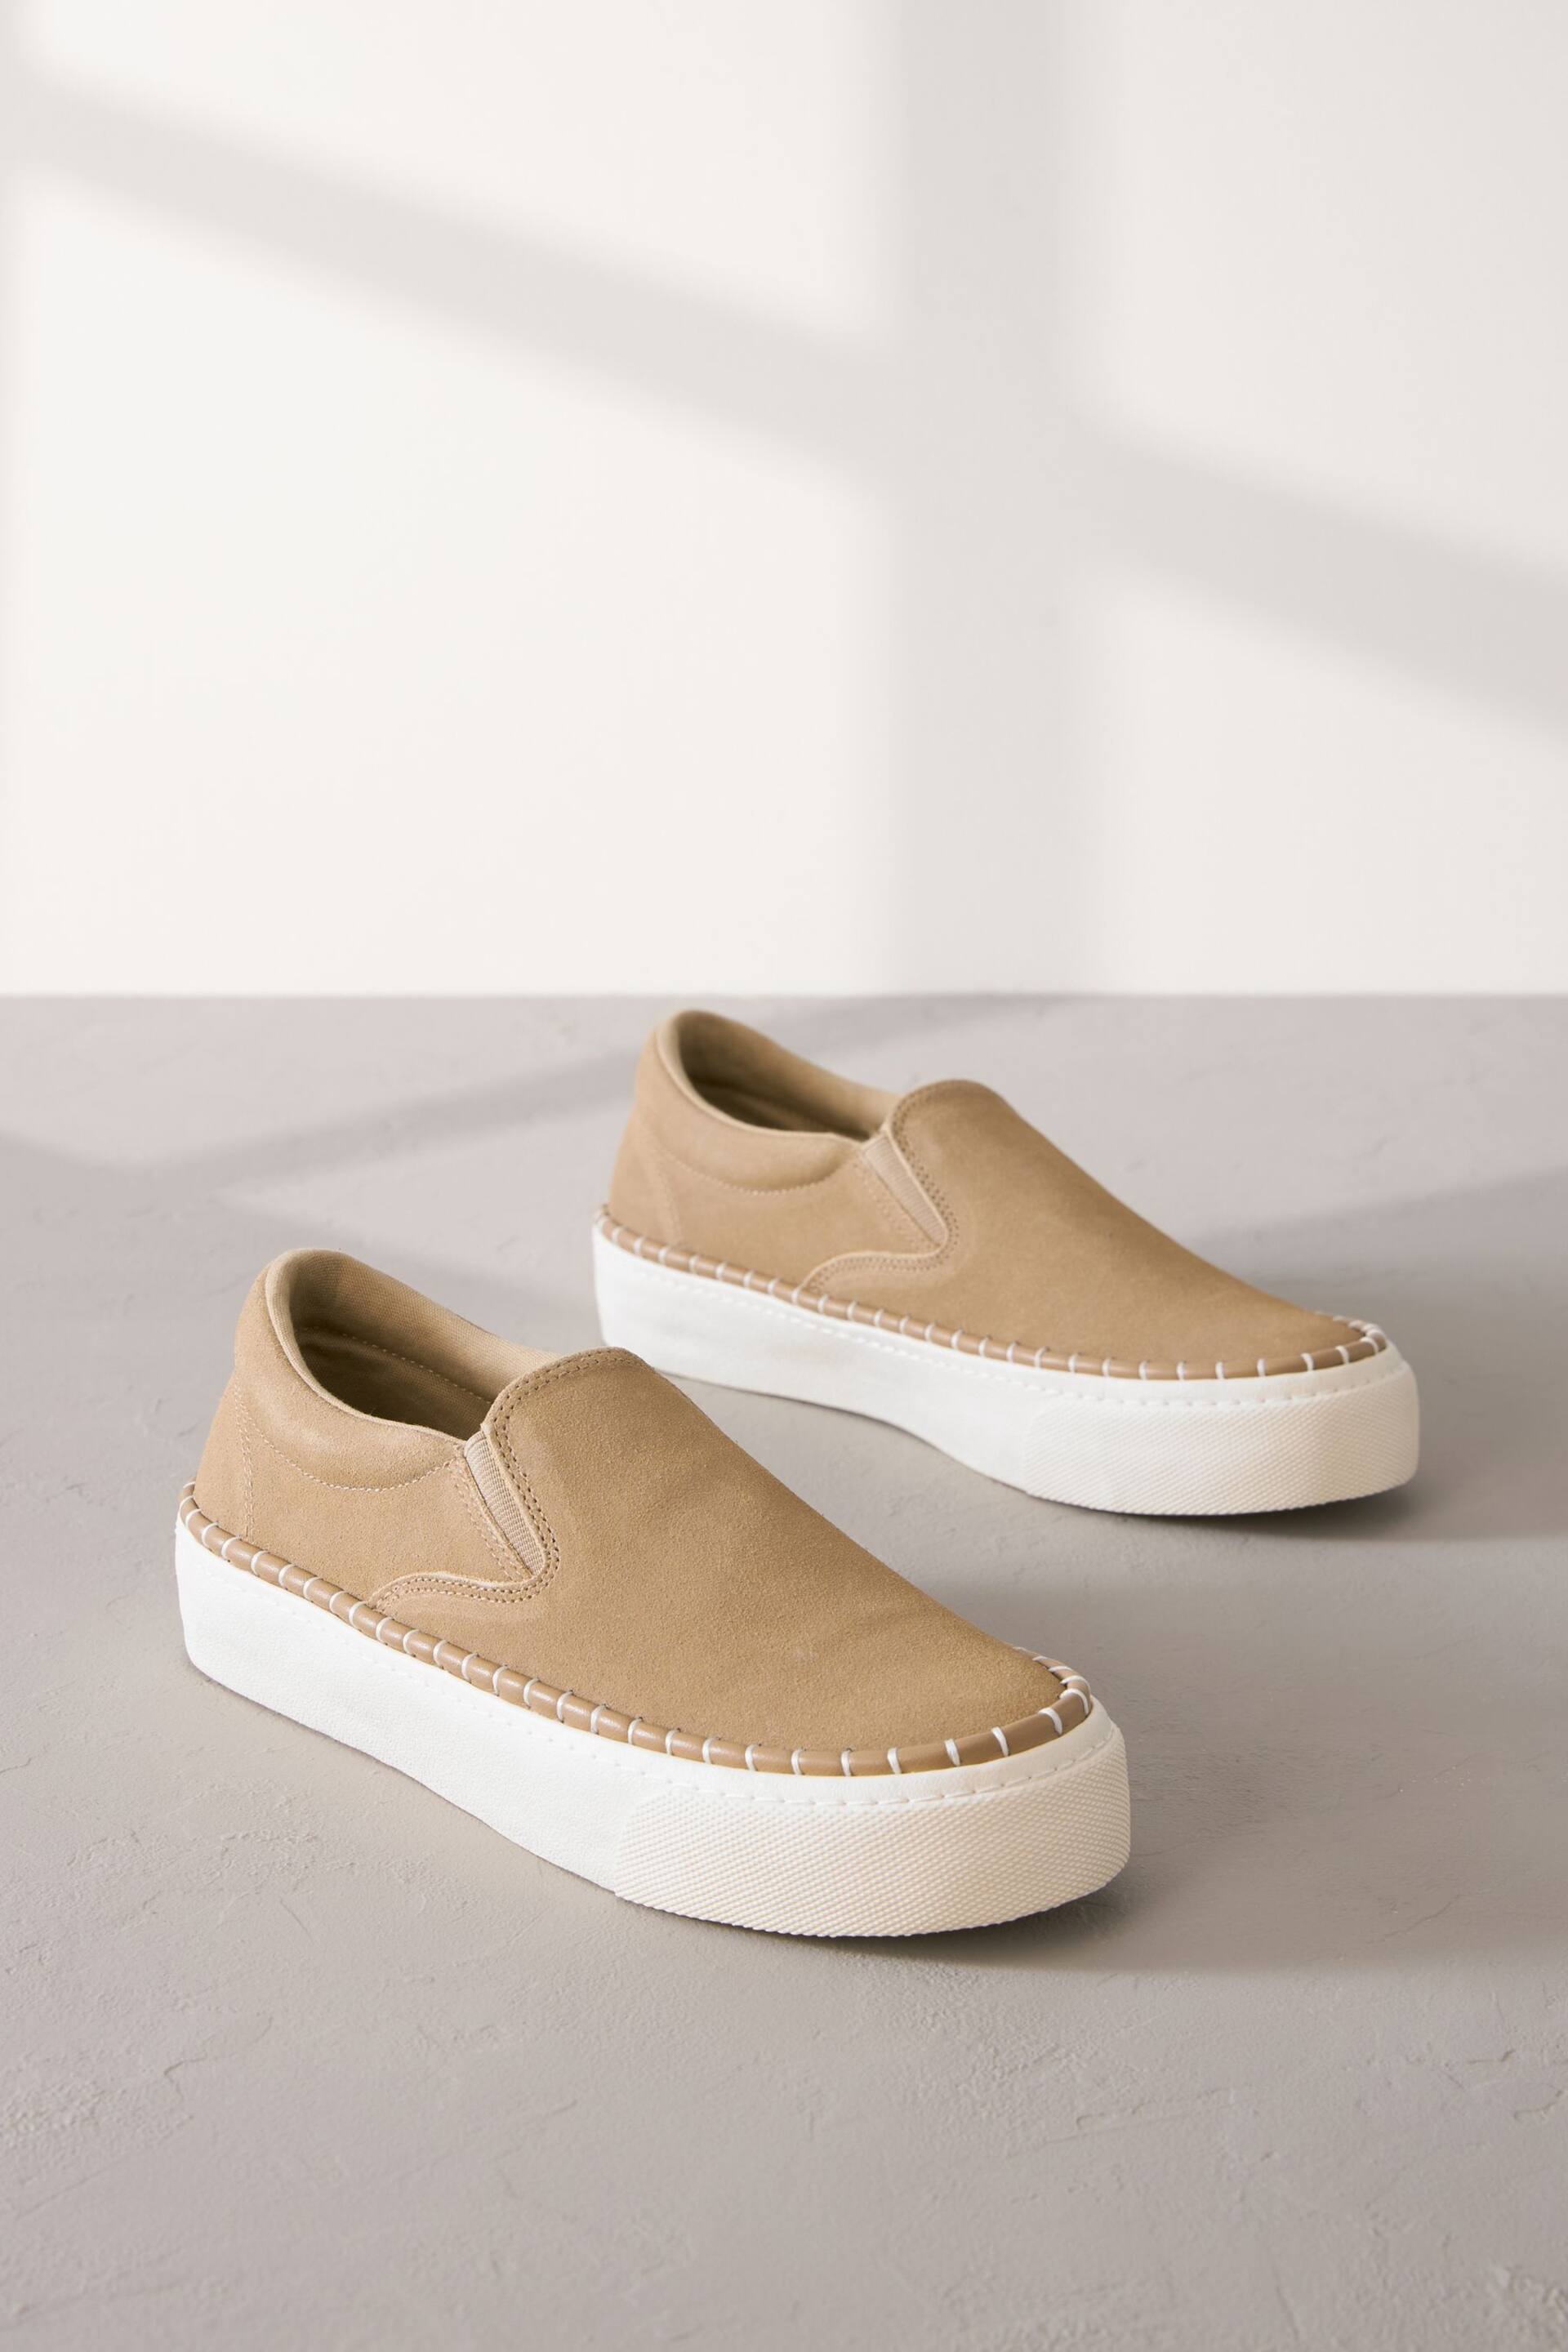 Camel Signature Leather Rand Stitch Detail Slip-Ons Trainers - Image 1 of 6